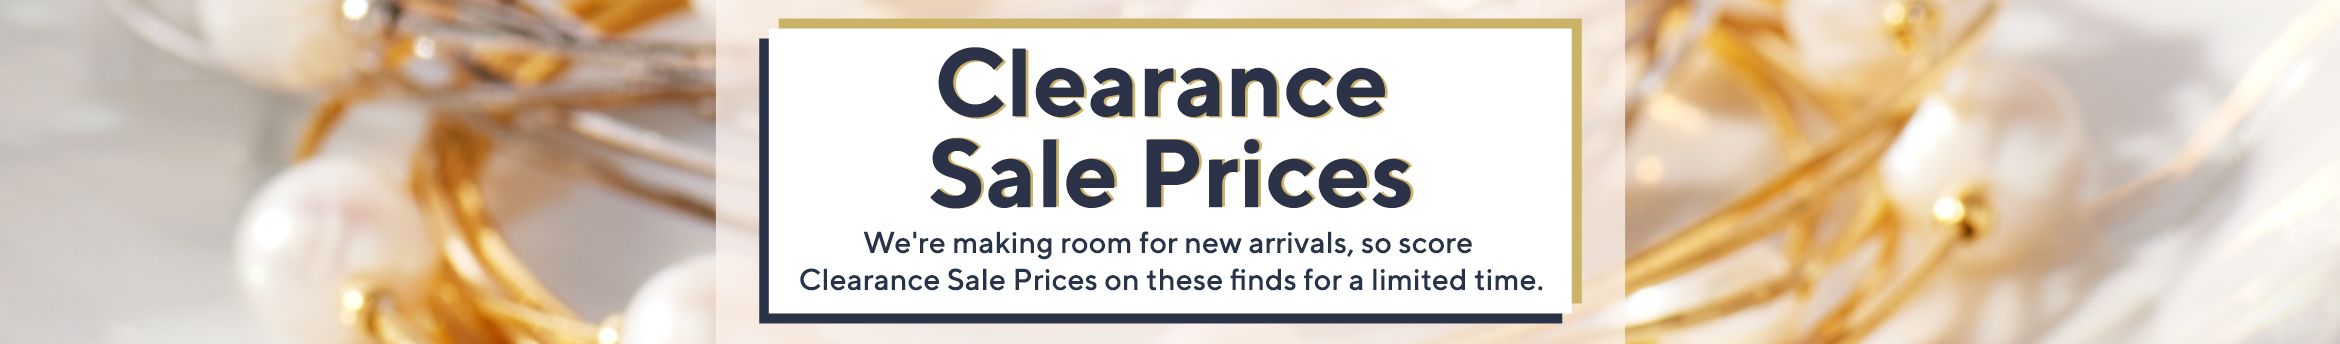 Clearance Sale Prices.  We're making room for new arrivals, so score Clearance Sale Prices on these finds for a limited time.